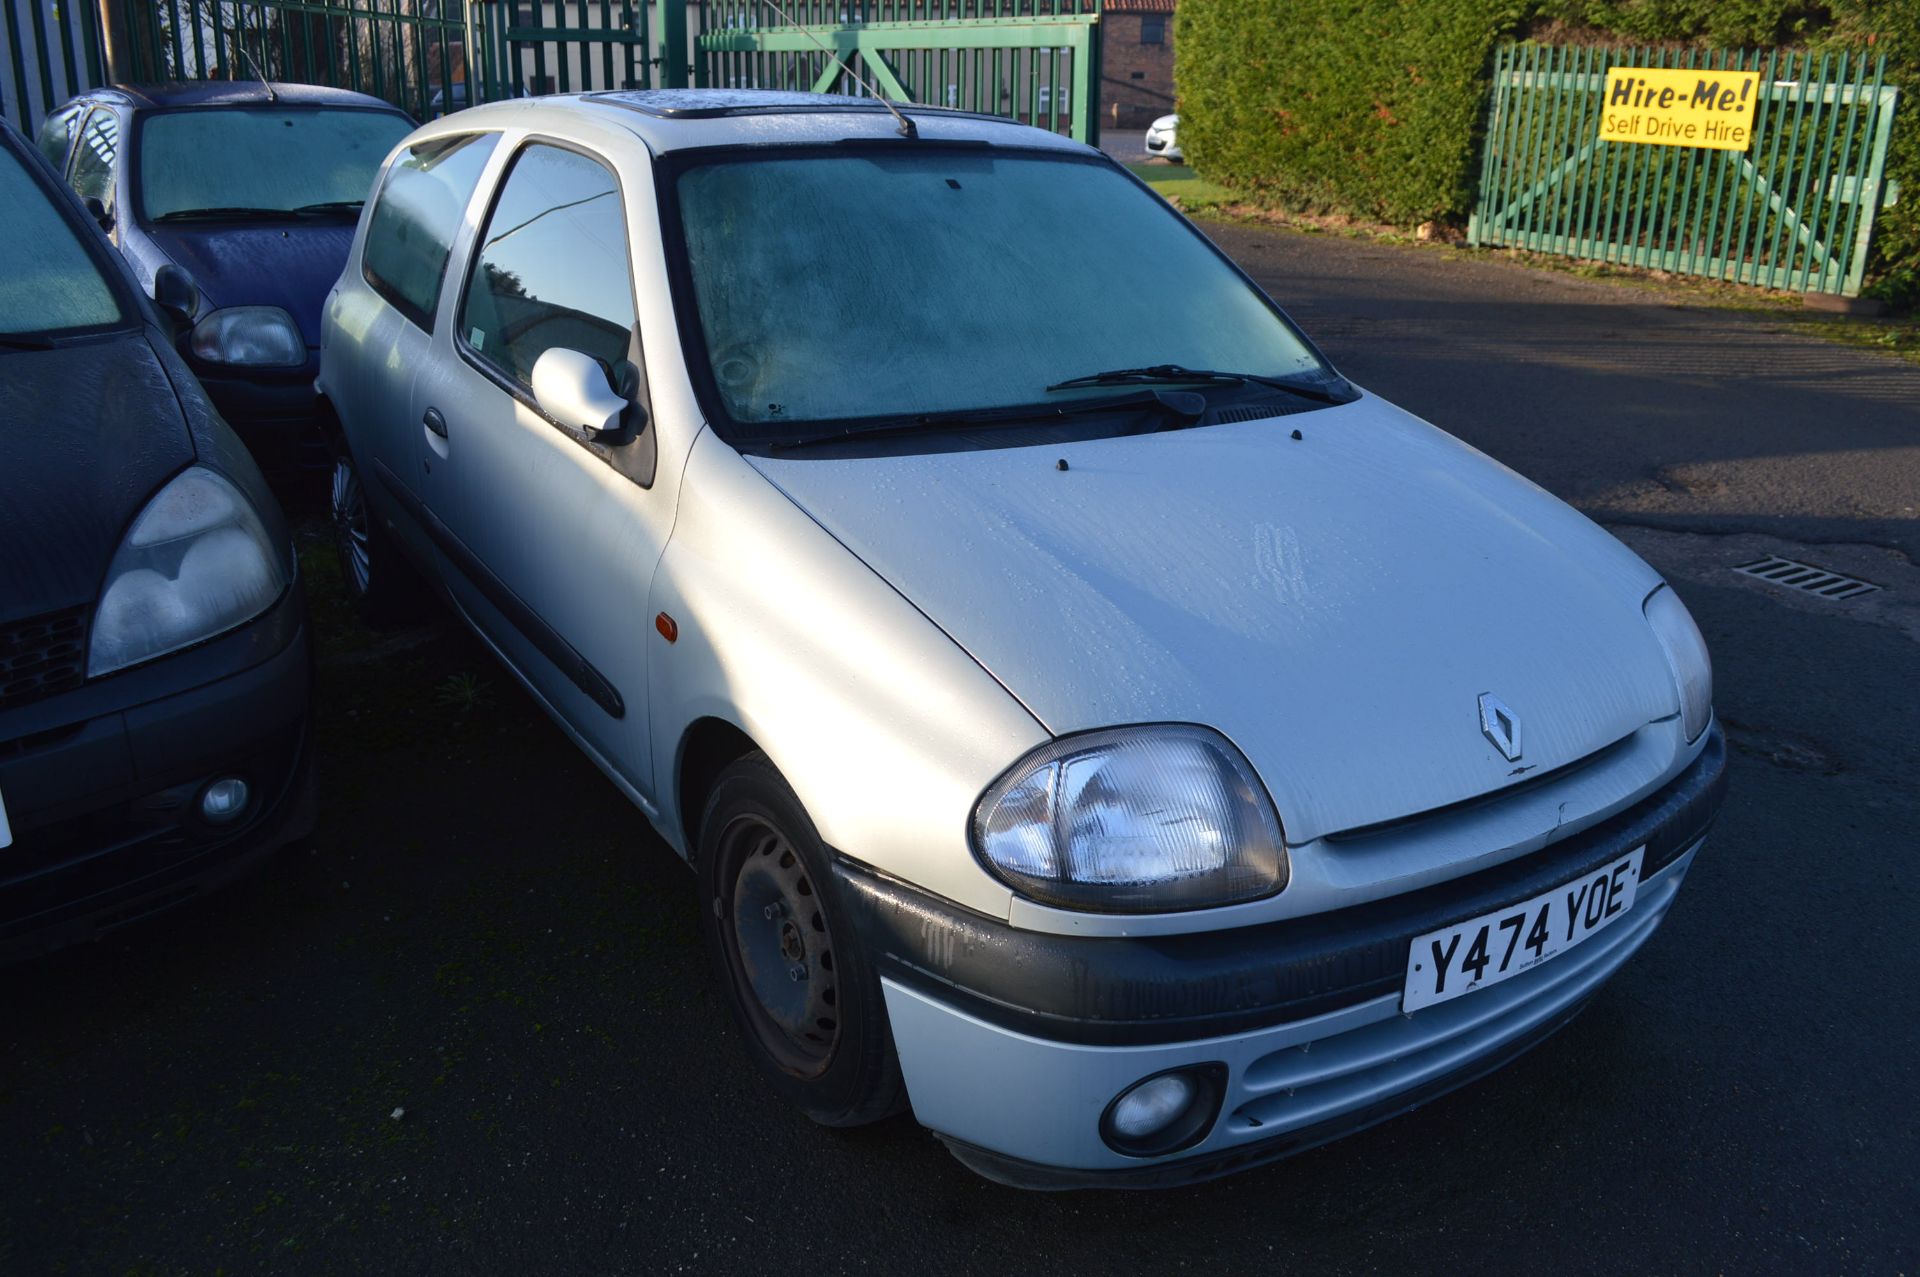 2001/Y REG RENAULT CLIO ALIZE - SELLING AS SPARES / REPAIRS *NO VAT*   DATE OF REGISTRATION: 12TH